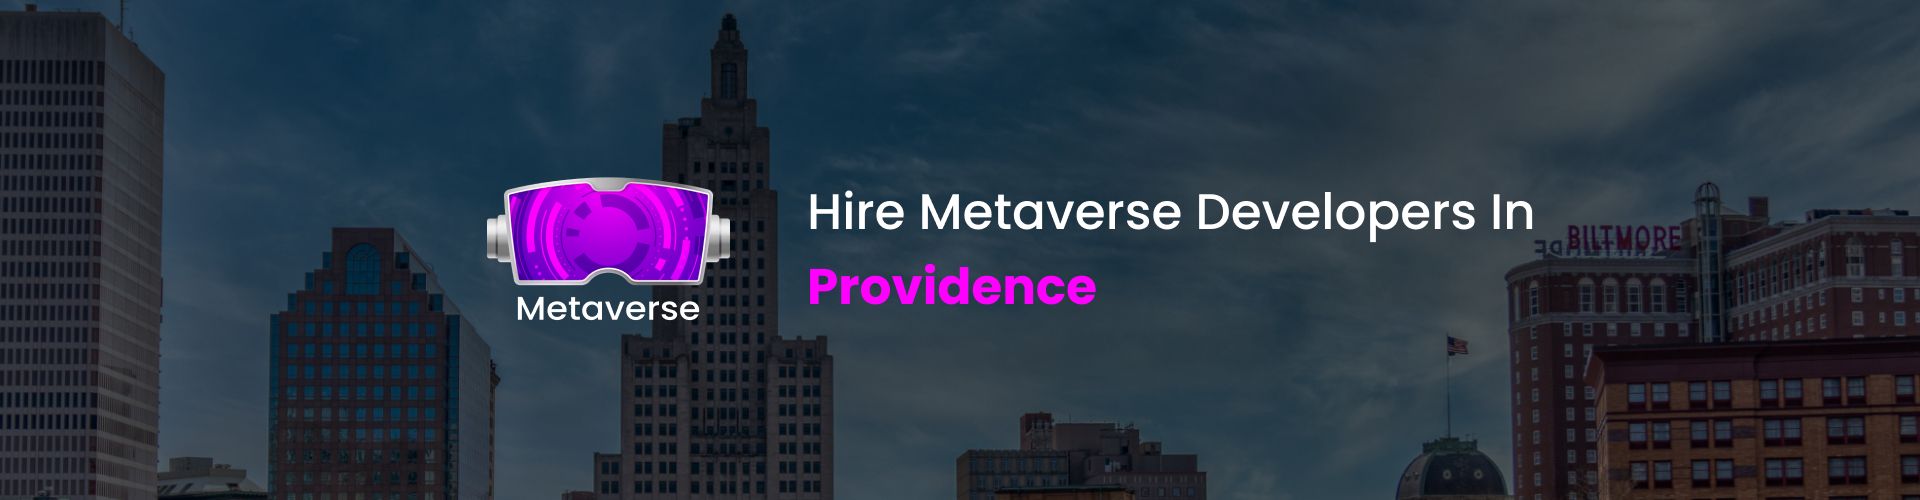 hire metaverse developers in providence